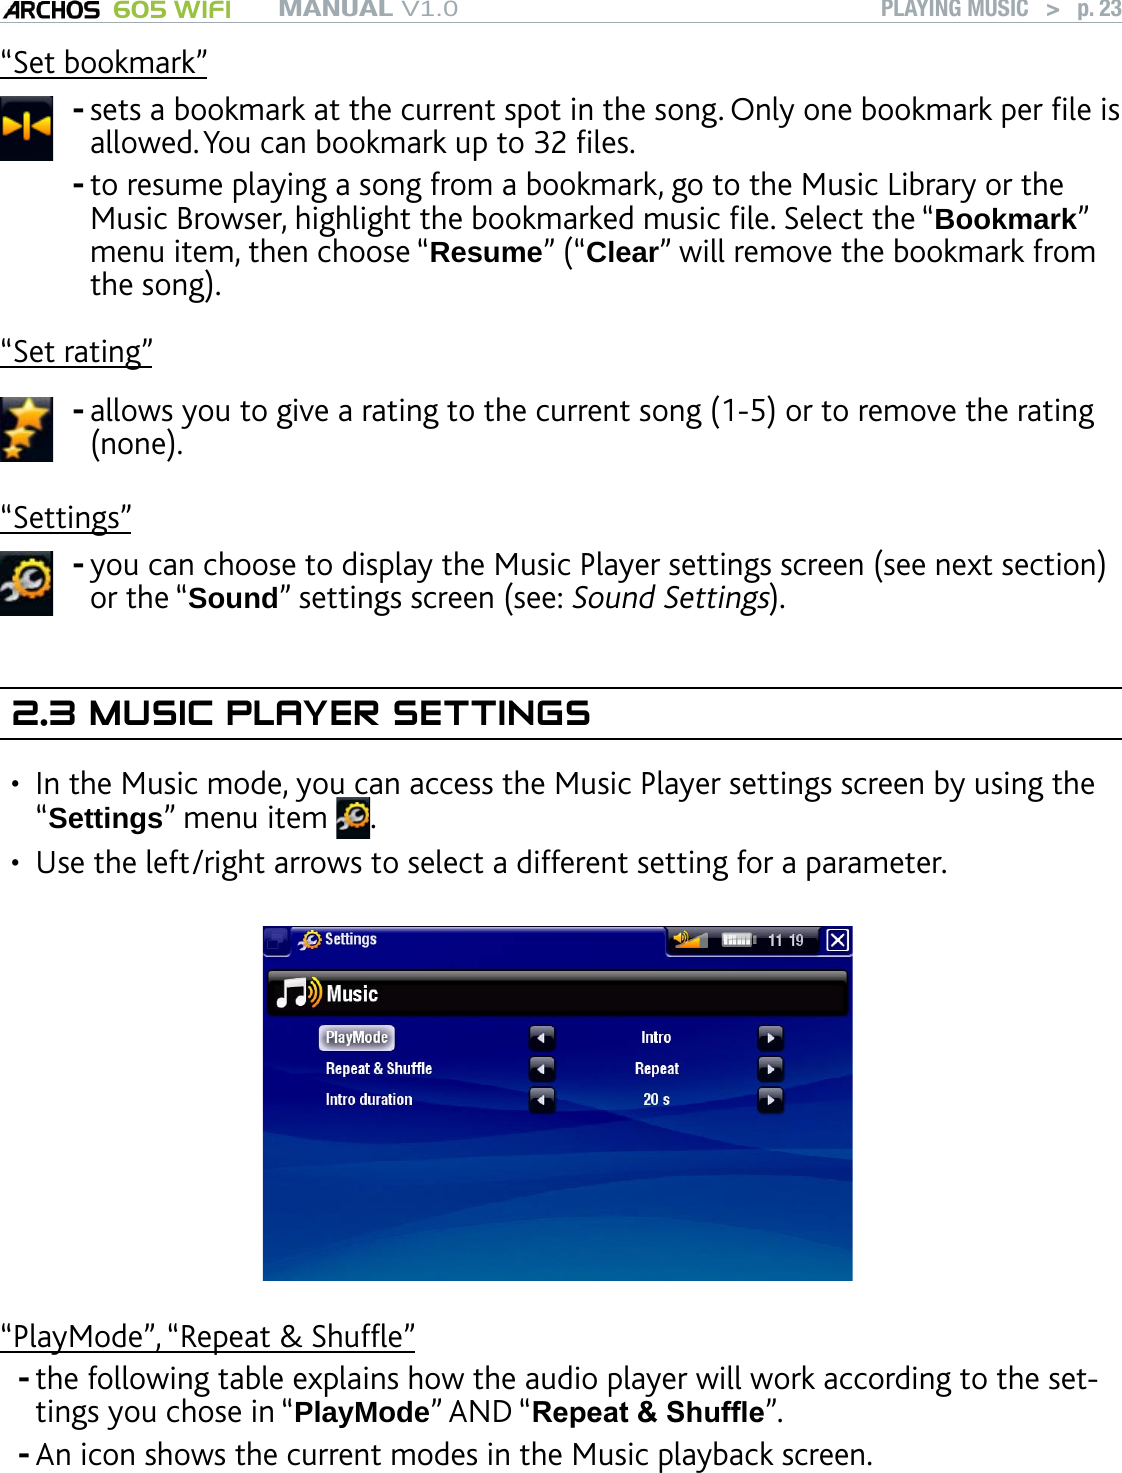 MANUAL V1.0 605 WIFI PLAYING MUSIC   &gt;   p. 23“Set bookmark”sets a bookmark at the current spot in the song. Only one bookmark per le is allowed. You can bookmark up to 32 les. to resume playing a song from a bookmark, go to the Music Library or the Music Browser, highlight the bookmarked music le. Select the “Bookmark” menu item, then choose “Resume” (“Clear” will remove the bookmark from the song).--“Set rating”allows you to give a rating to the current song (1-5) or to remove the rating (none).-“Settings”you can choose to display the Music Player settings screen (see next section) or the “Sound” settings screen (see: Sound Settings).-2.3 MUSIC PLAYER SETTINGSIn the Music mode, you can access the Music Player settings screen by using the “Settings” menu item  . Use the left/right arrows to select a different setting for a parameter.“PlayMode”, “Repeat &amp; Shufe”the following table explains how the audio player will work according to the set-tings you chose in “PlayMode” AND “Repeat &amp; Shufe”. An icon shows the current modes in the Music playback screen.••--